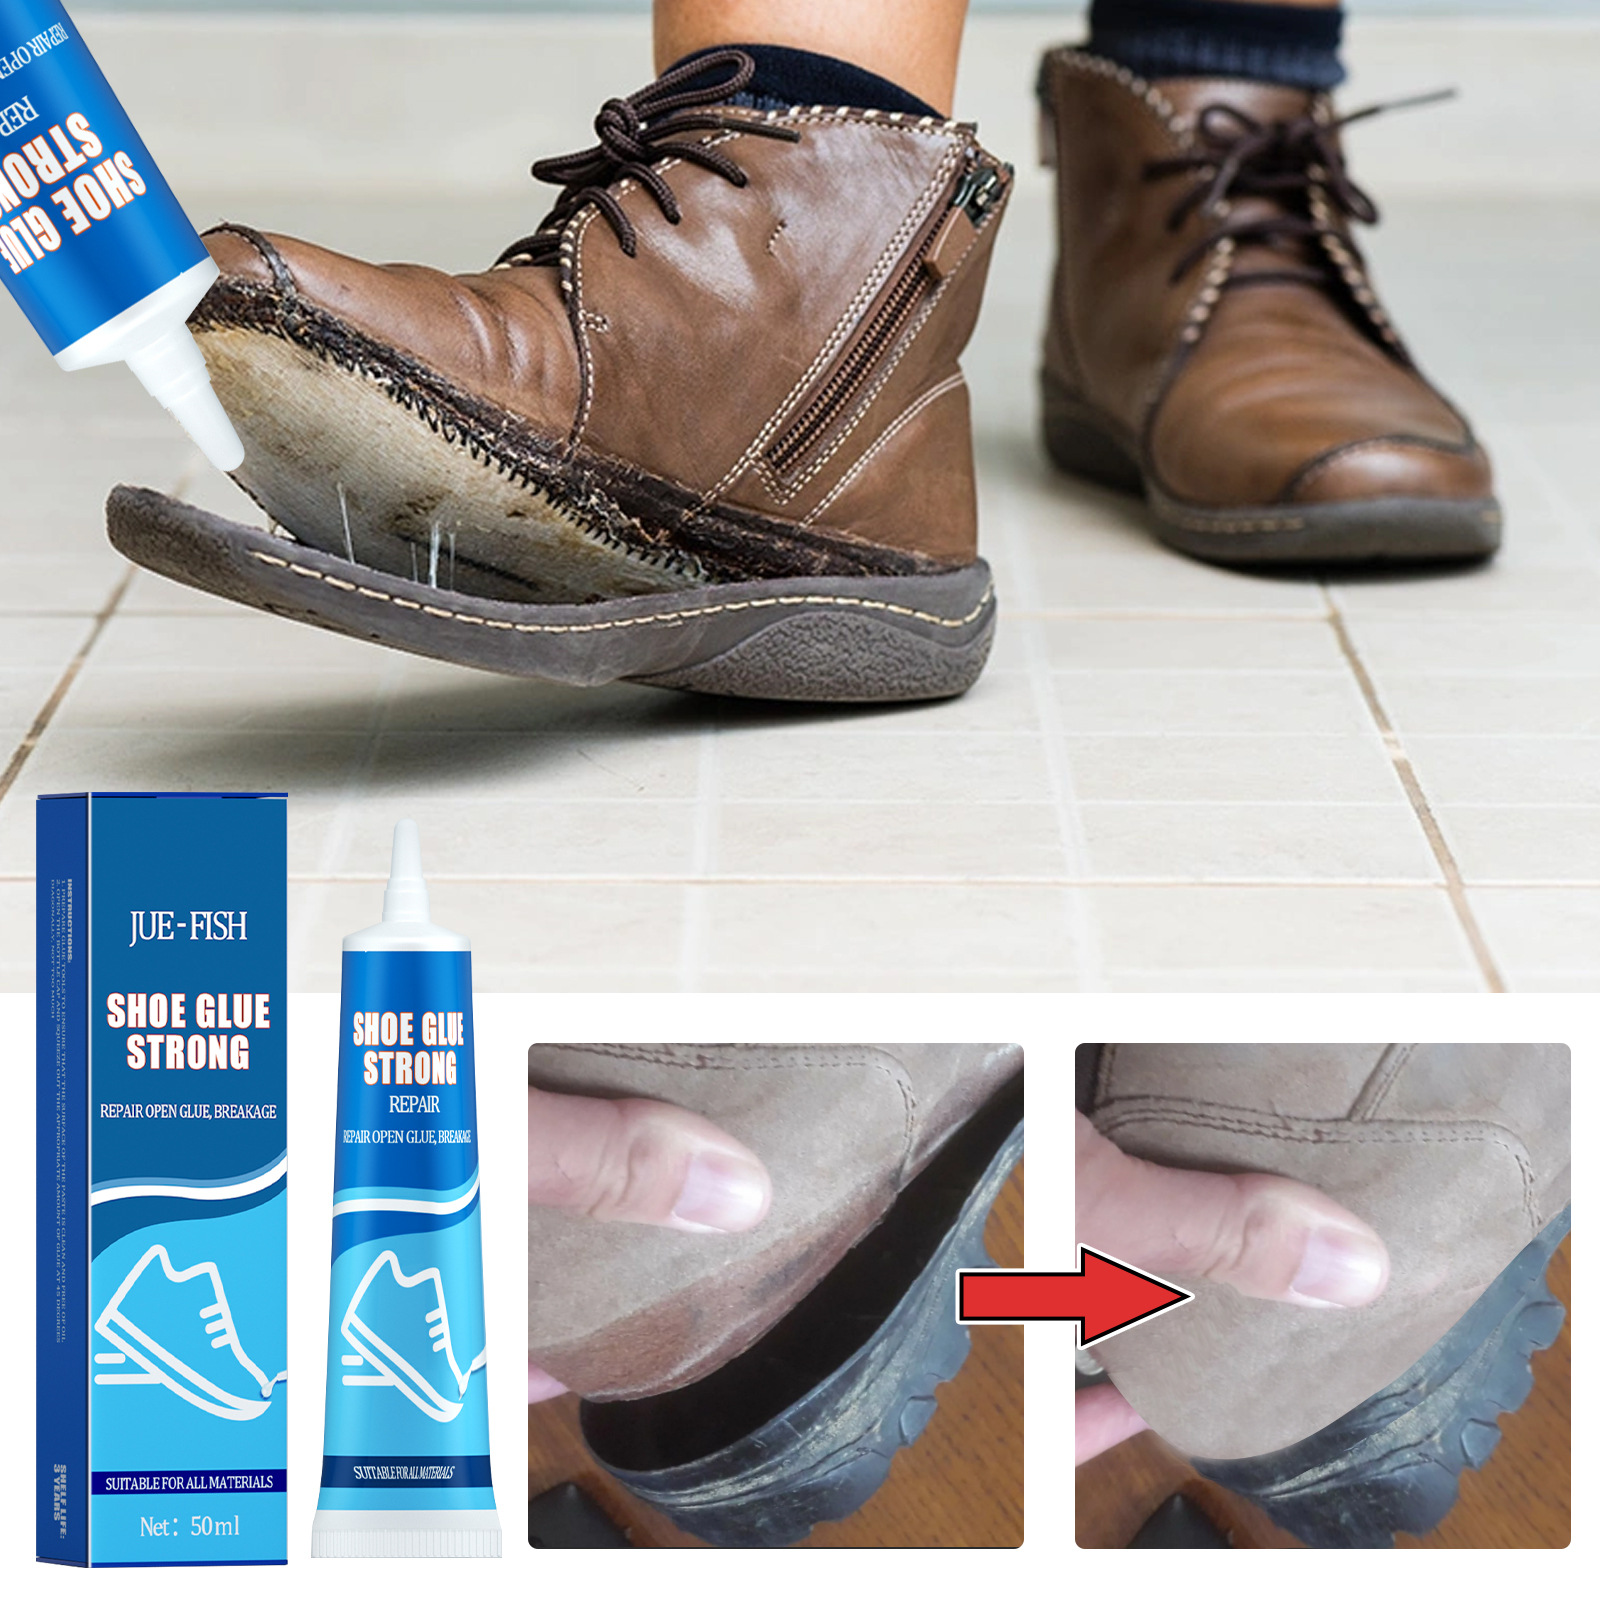 Kaibingtuan shoes glue shoes special universal strong glue waterproof stick  sports shoes leather shoes canvas leather shoes glue repair soles unglued  open glue genuine repair adhesive resin soft glue กาว 〖SSY〗